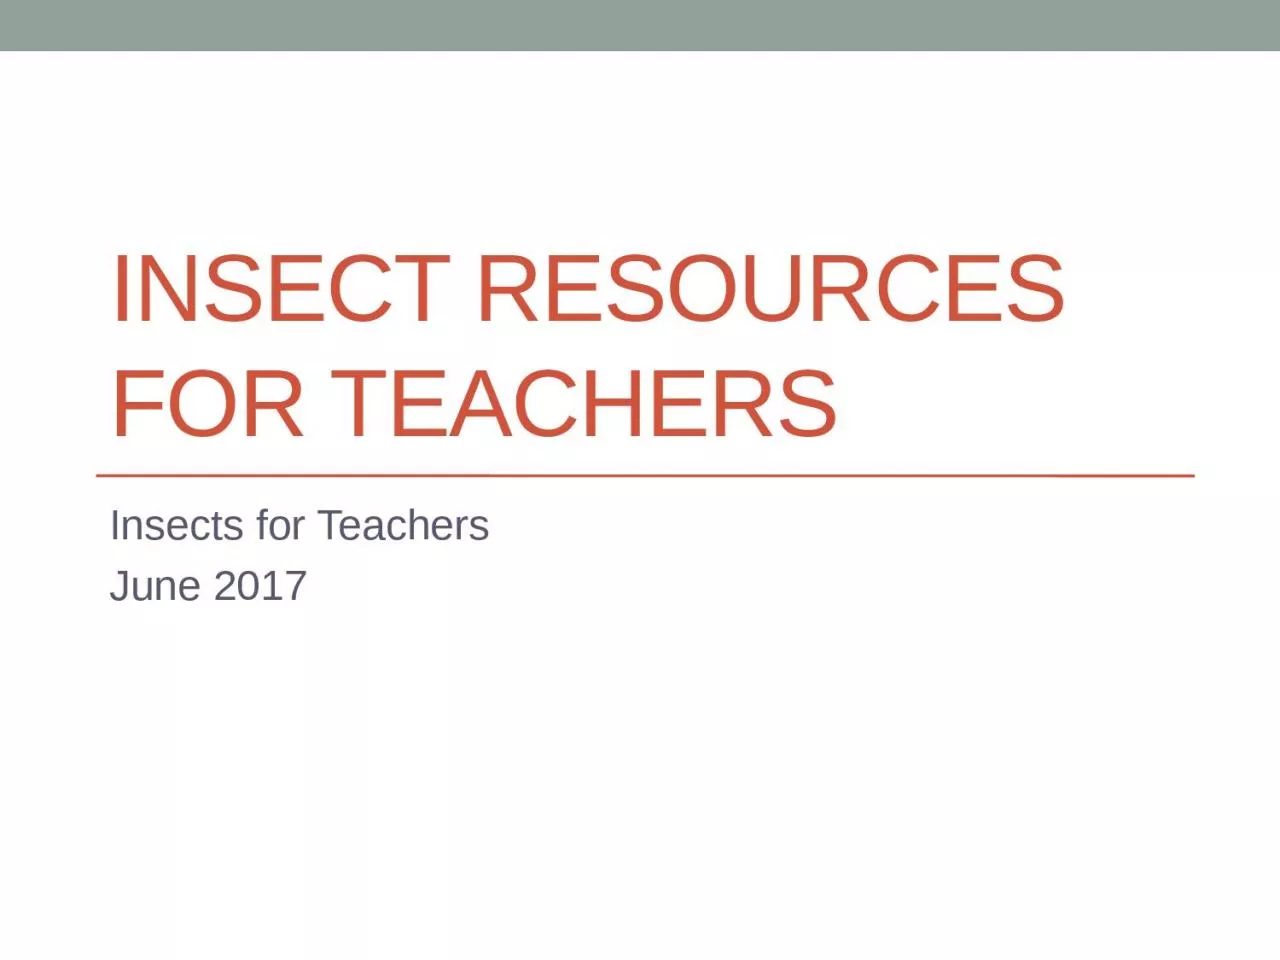 Insect Resources for Teachers